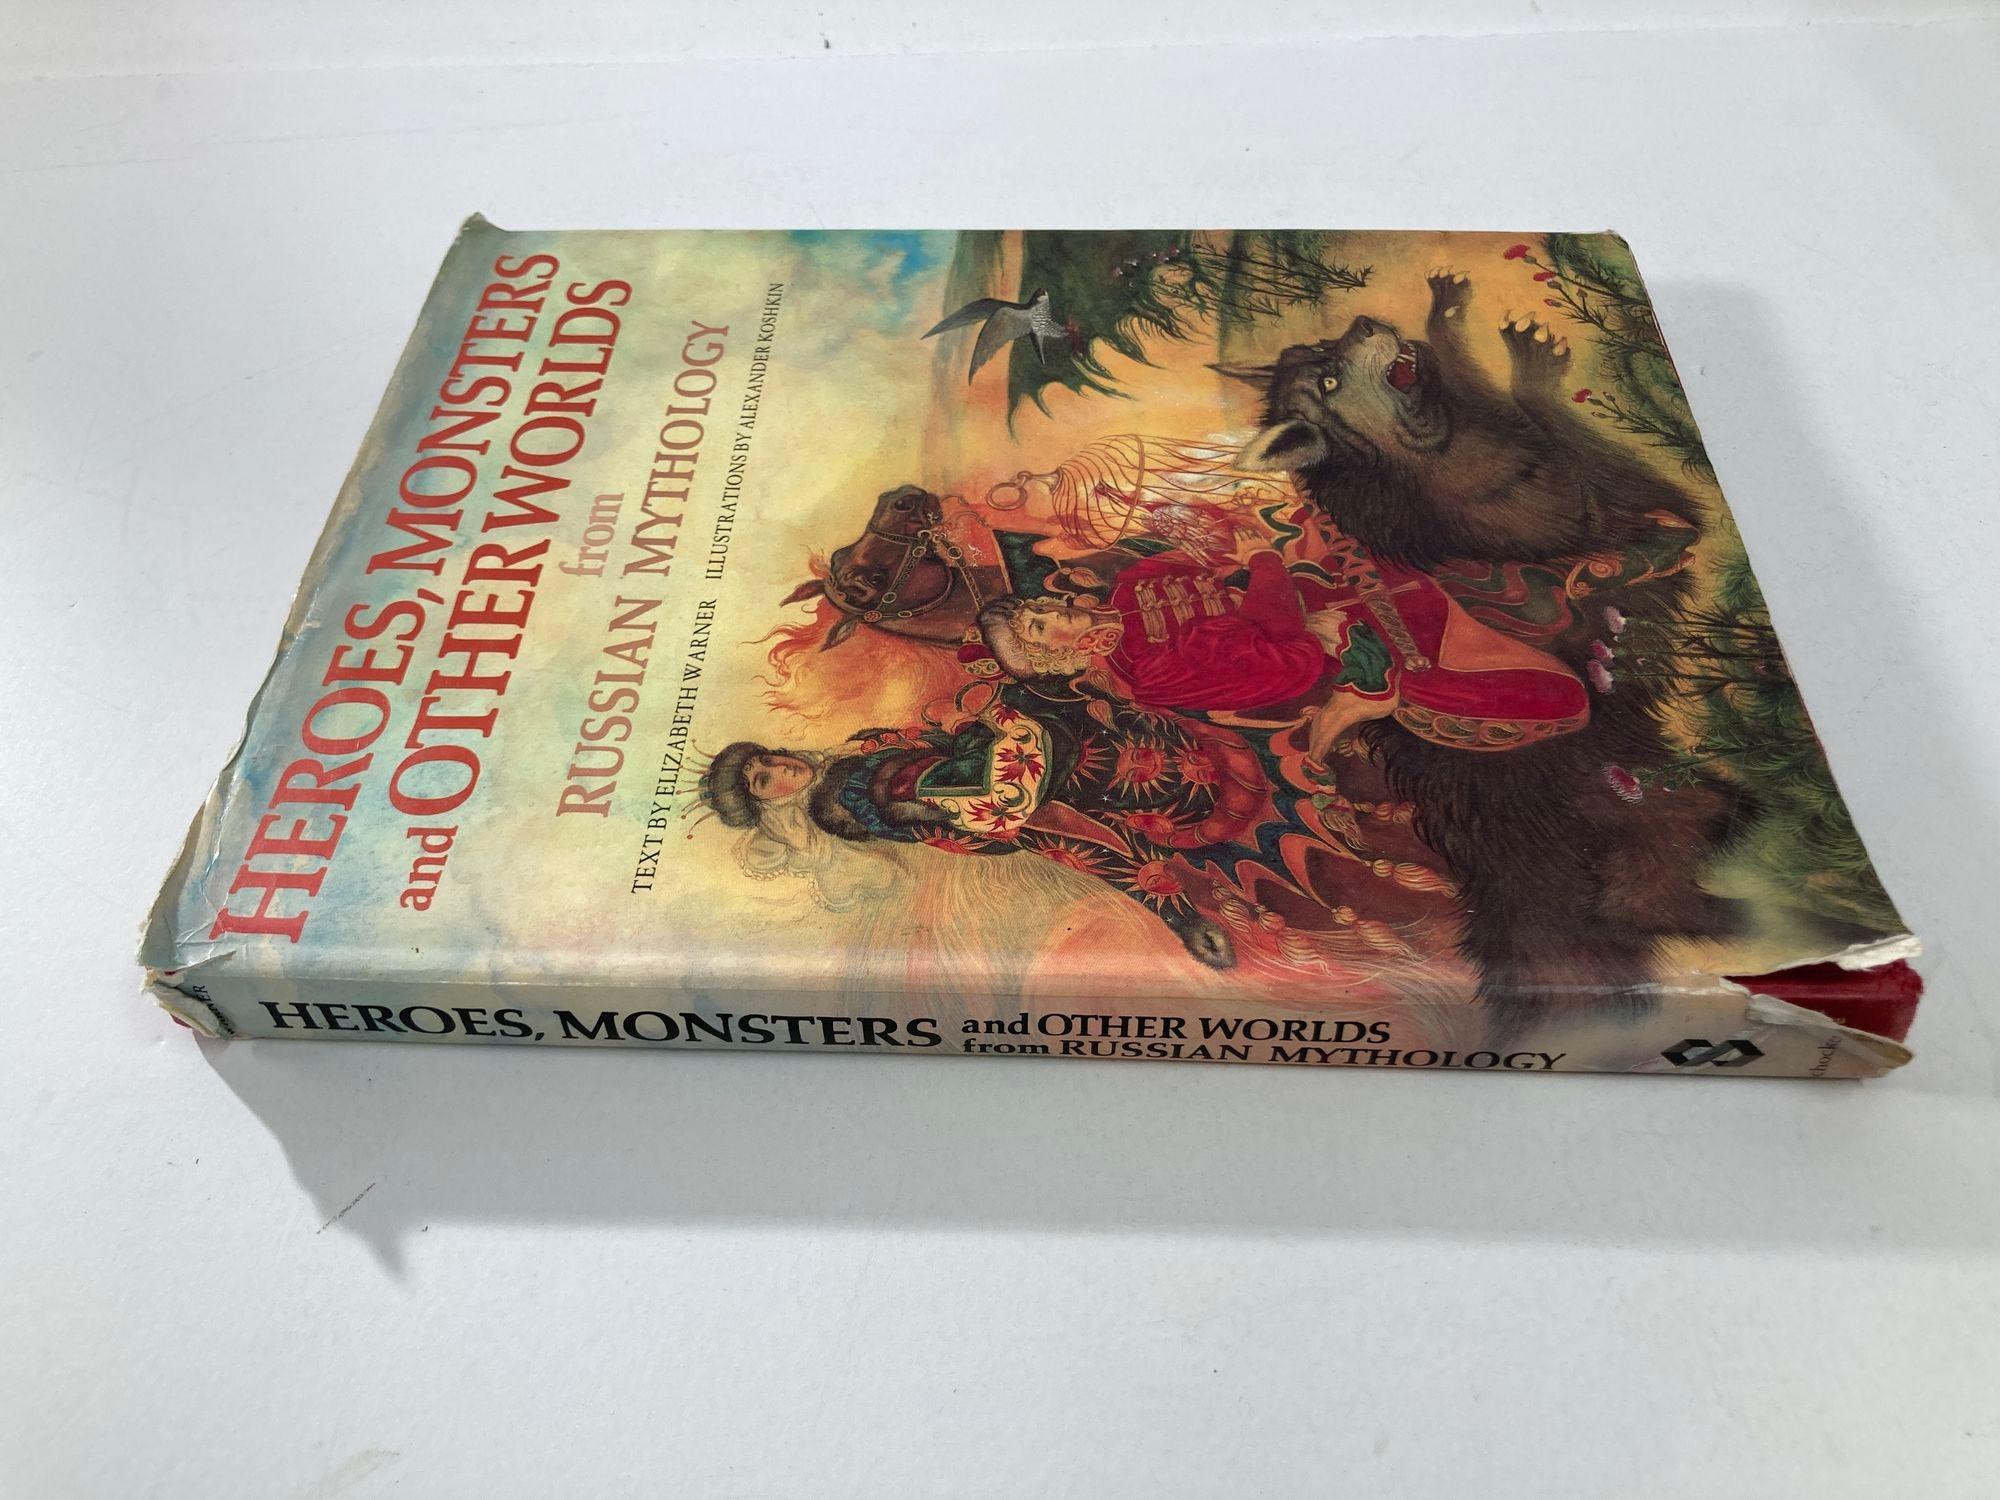 Expressionniste Heroes Monsters & Other Worlds from Russian Mythology Hardcover Book 1985 1st Ed en vente